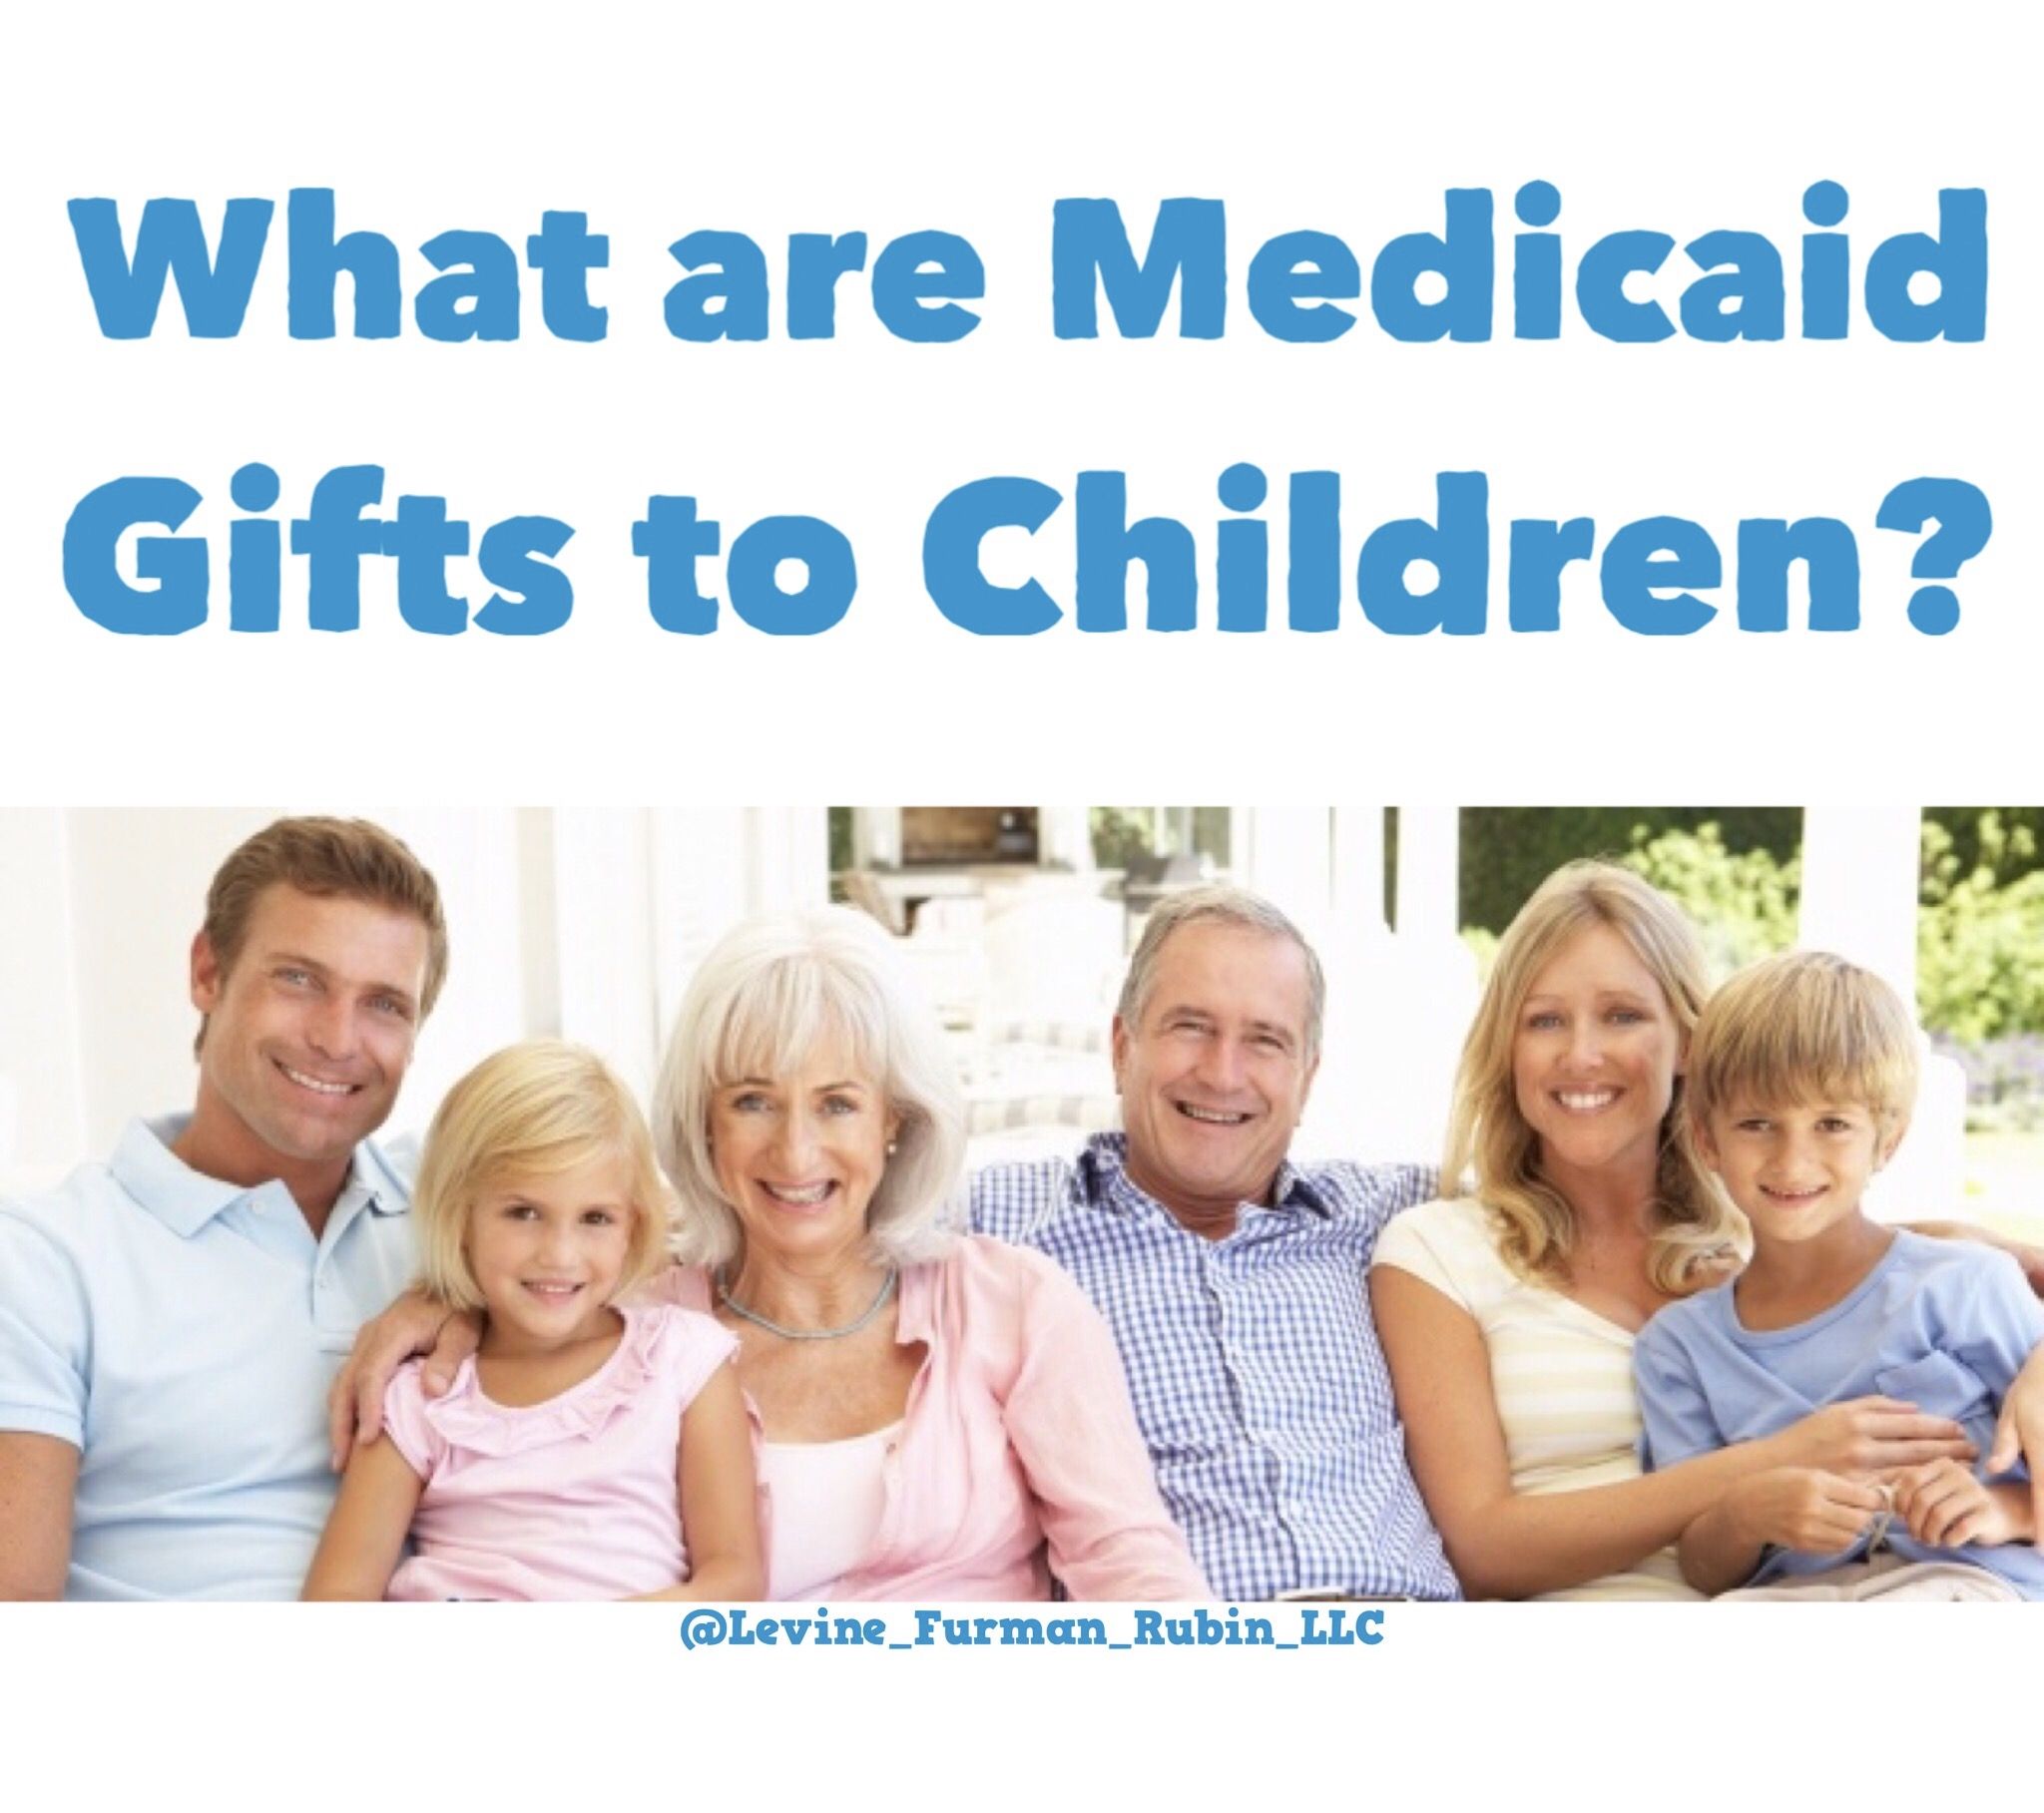 Medicaid Gifts to Children